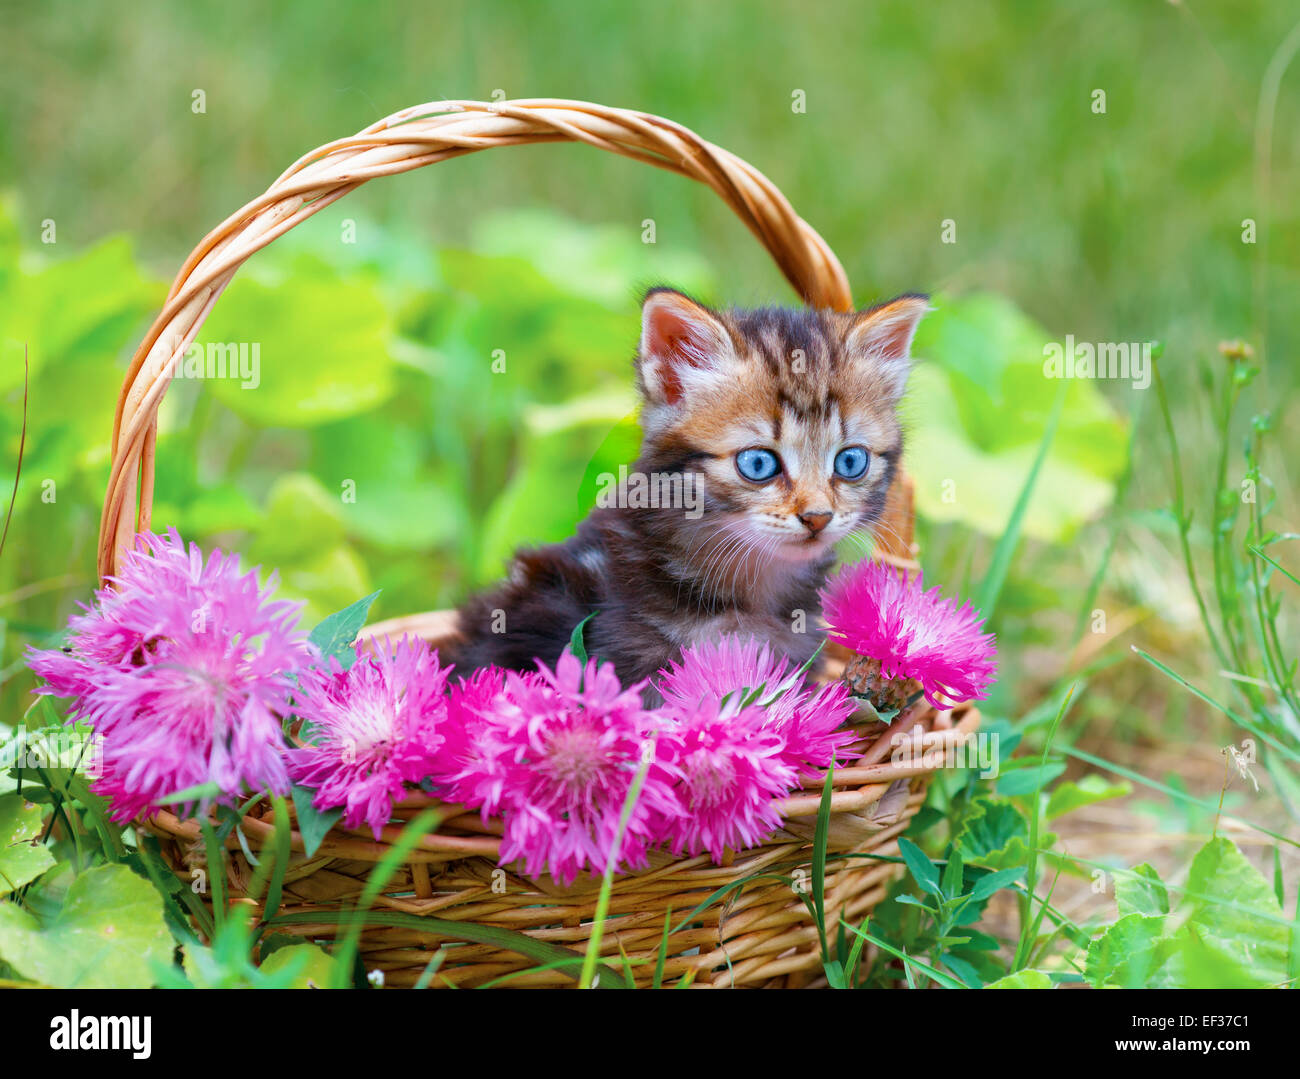 Cute little kitten in a basket with pink flowers outdoors Stock ...